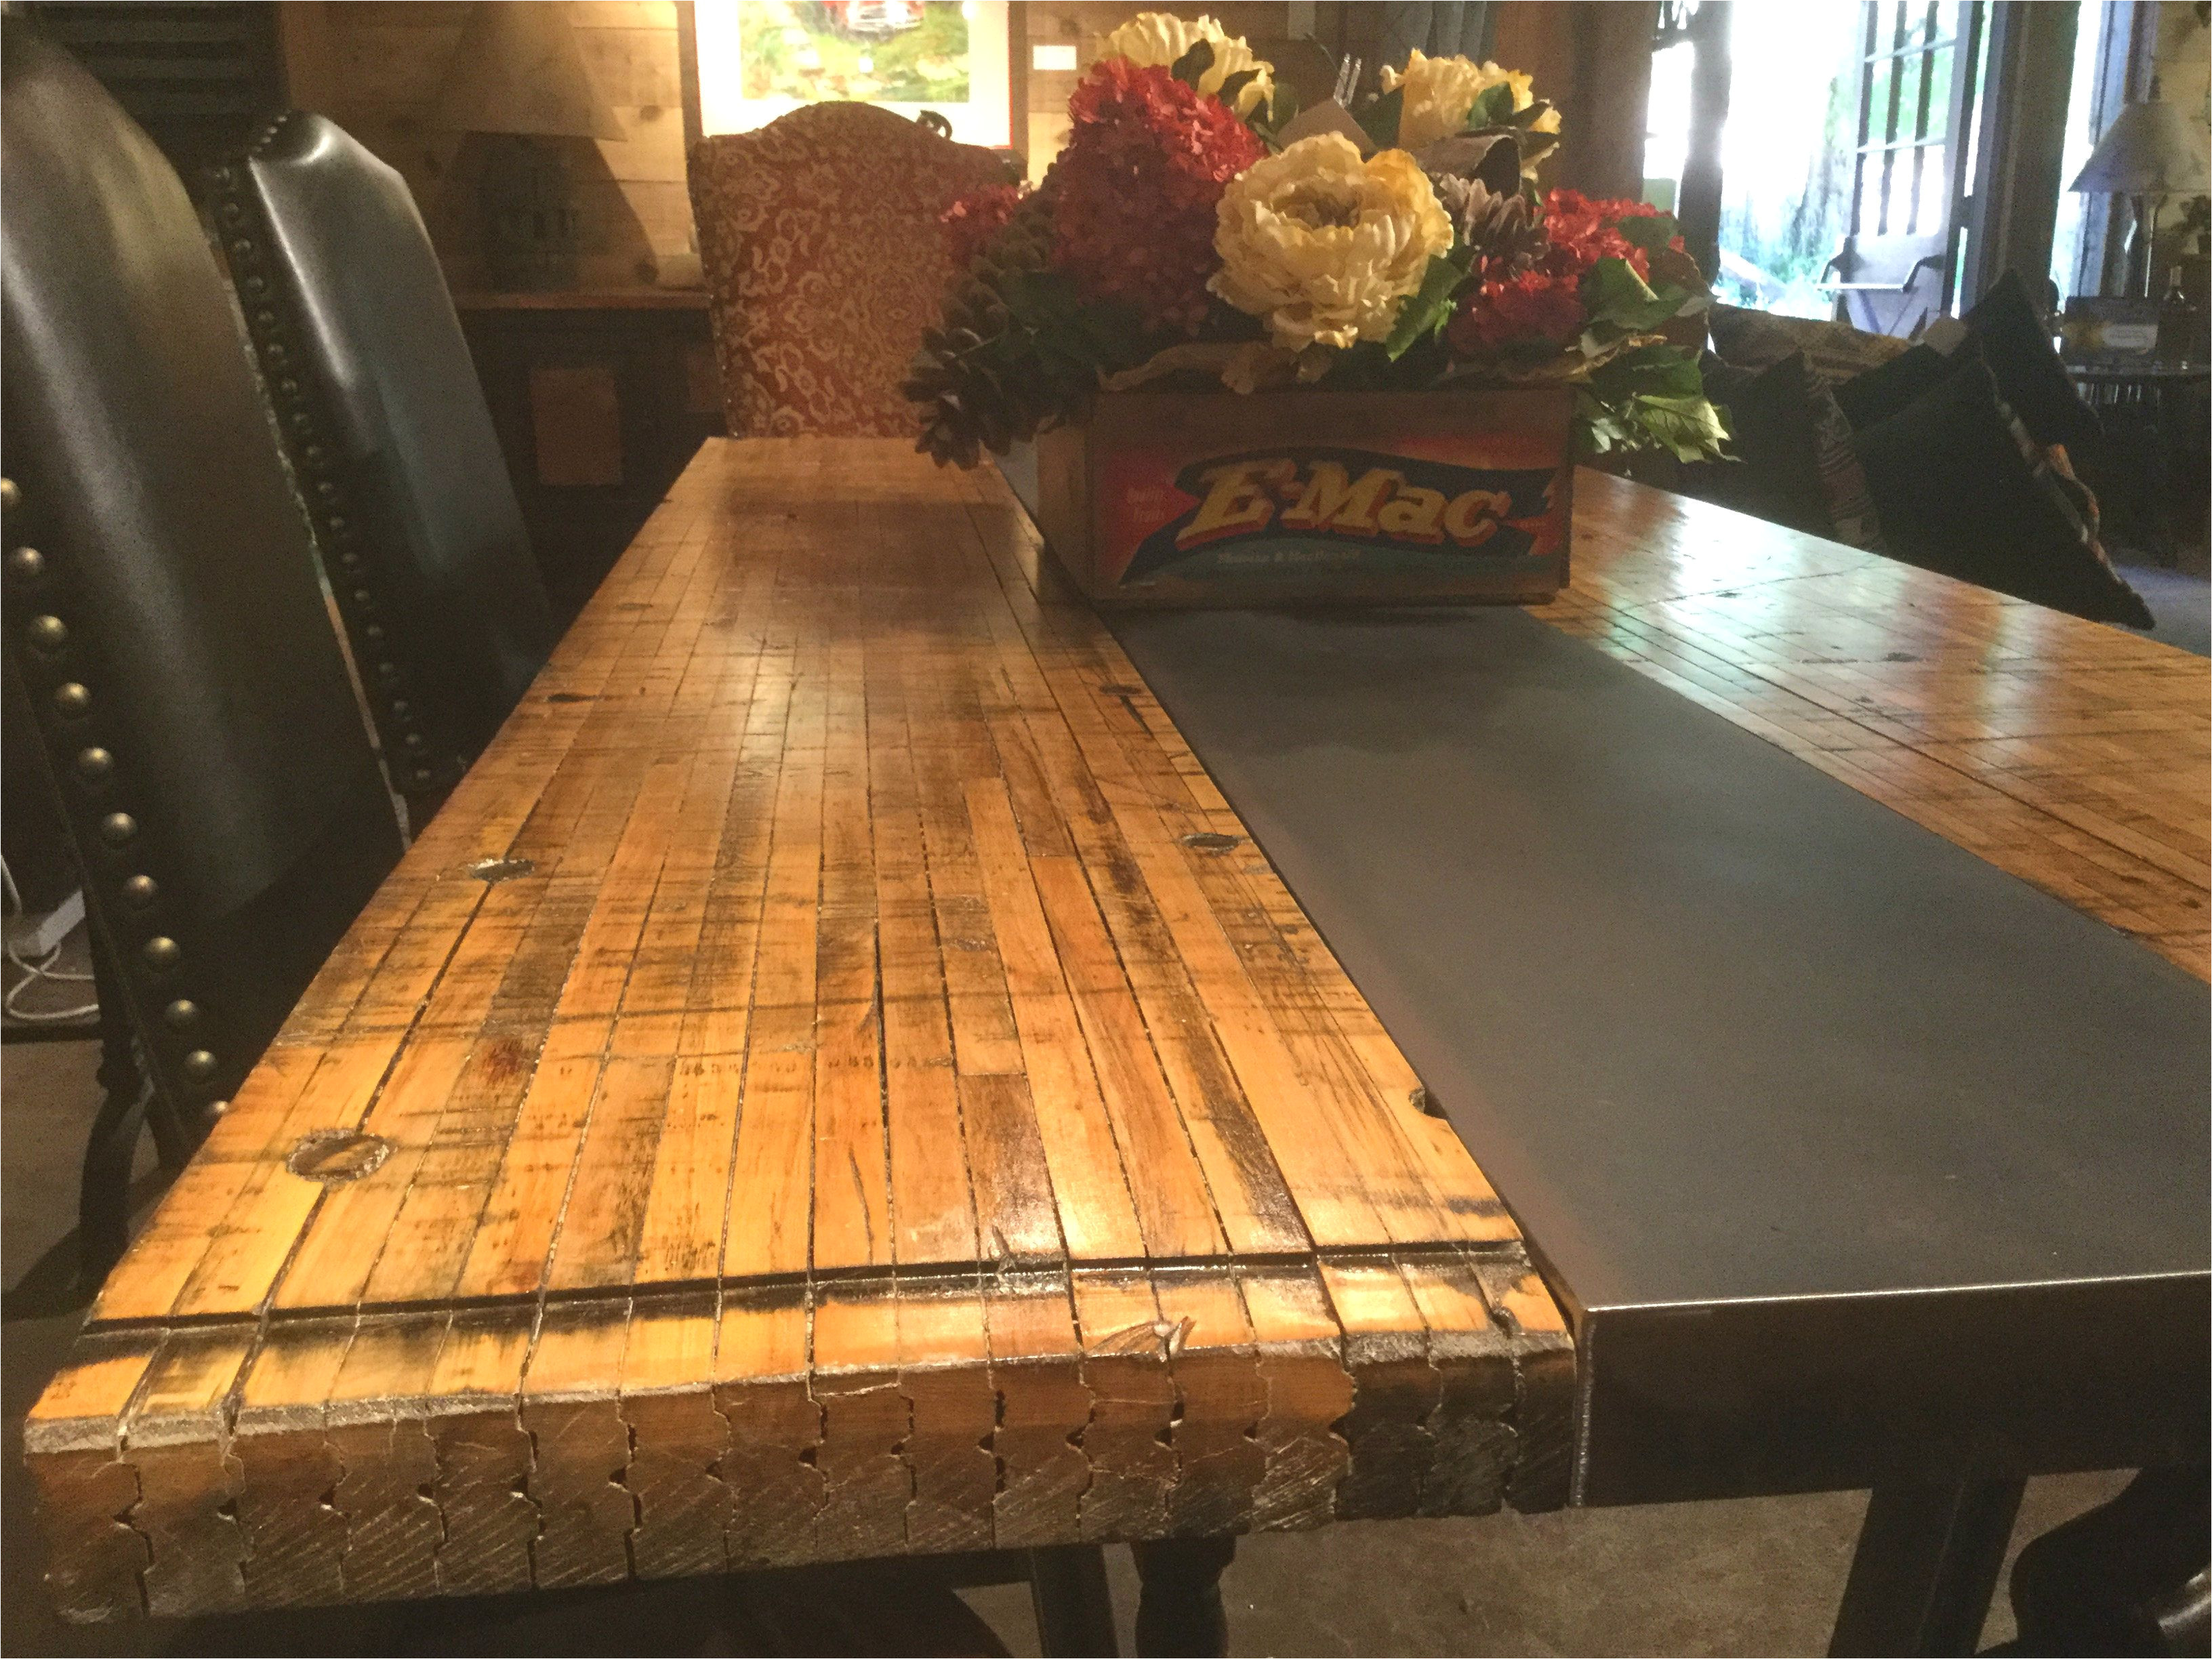 this unique table top is made out of the flooring from train boxcars and is supported by a steel center